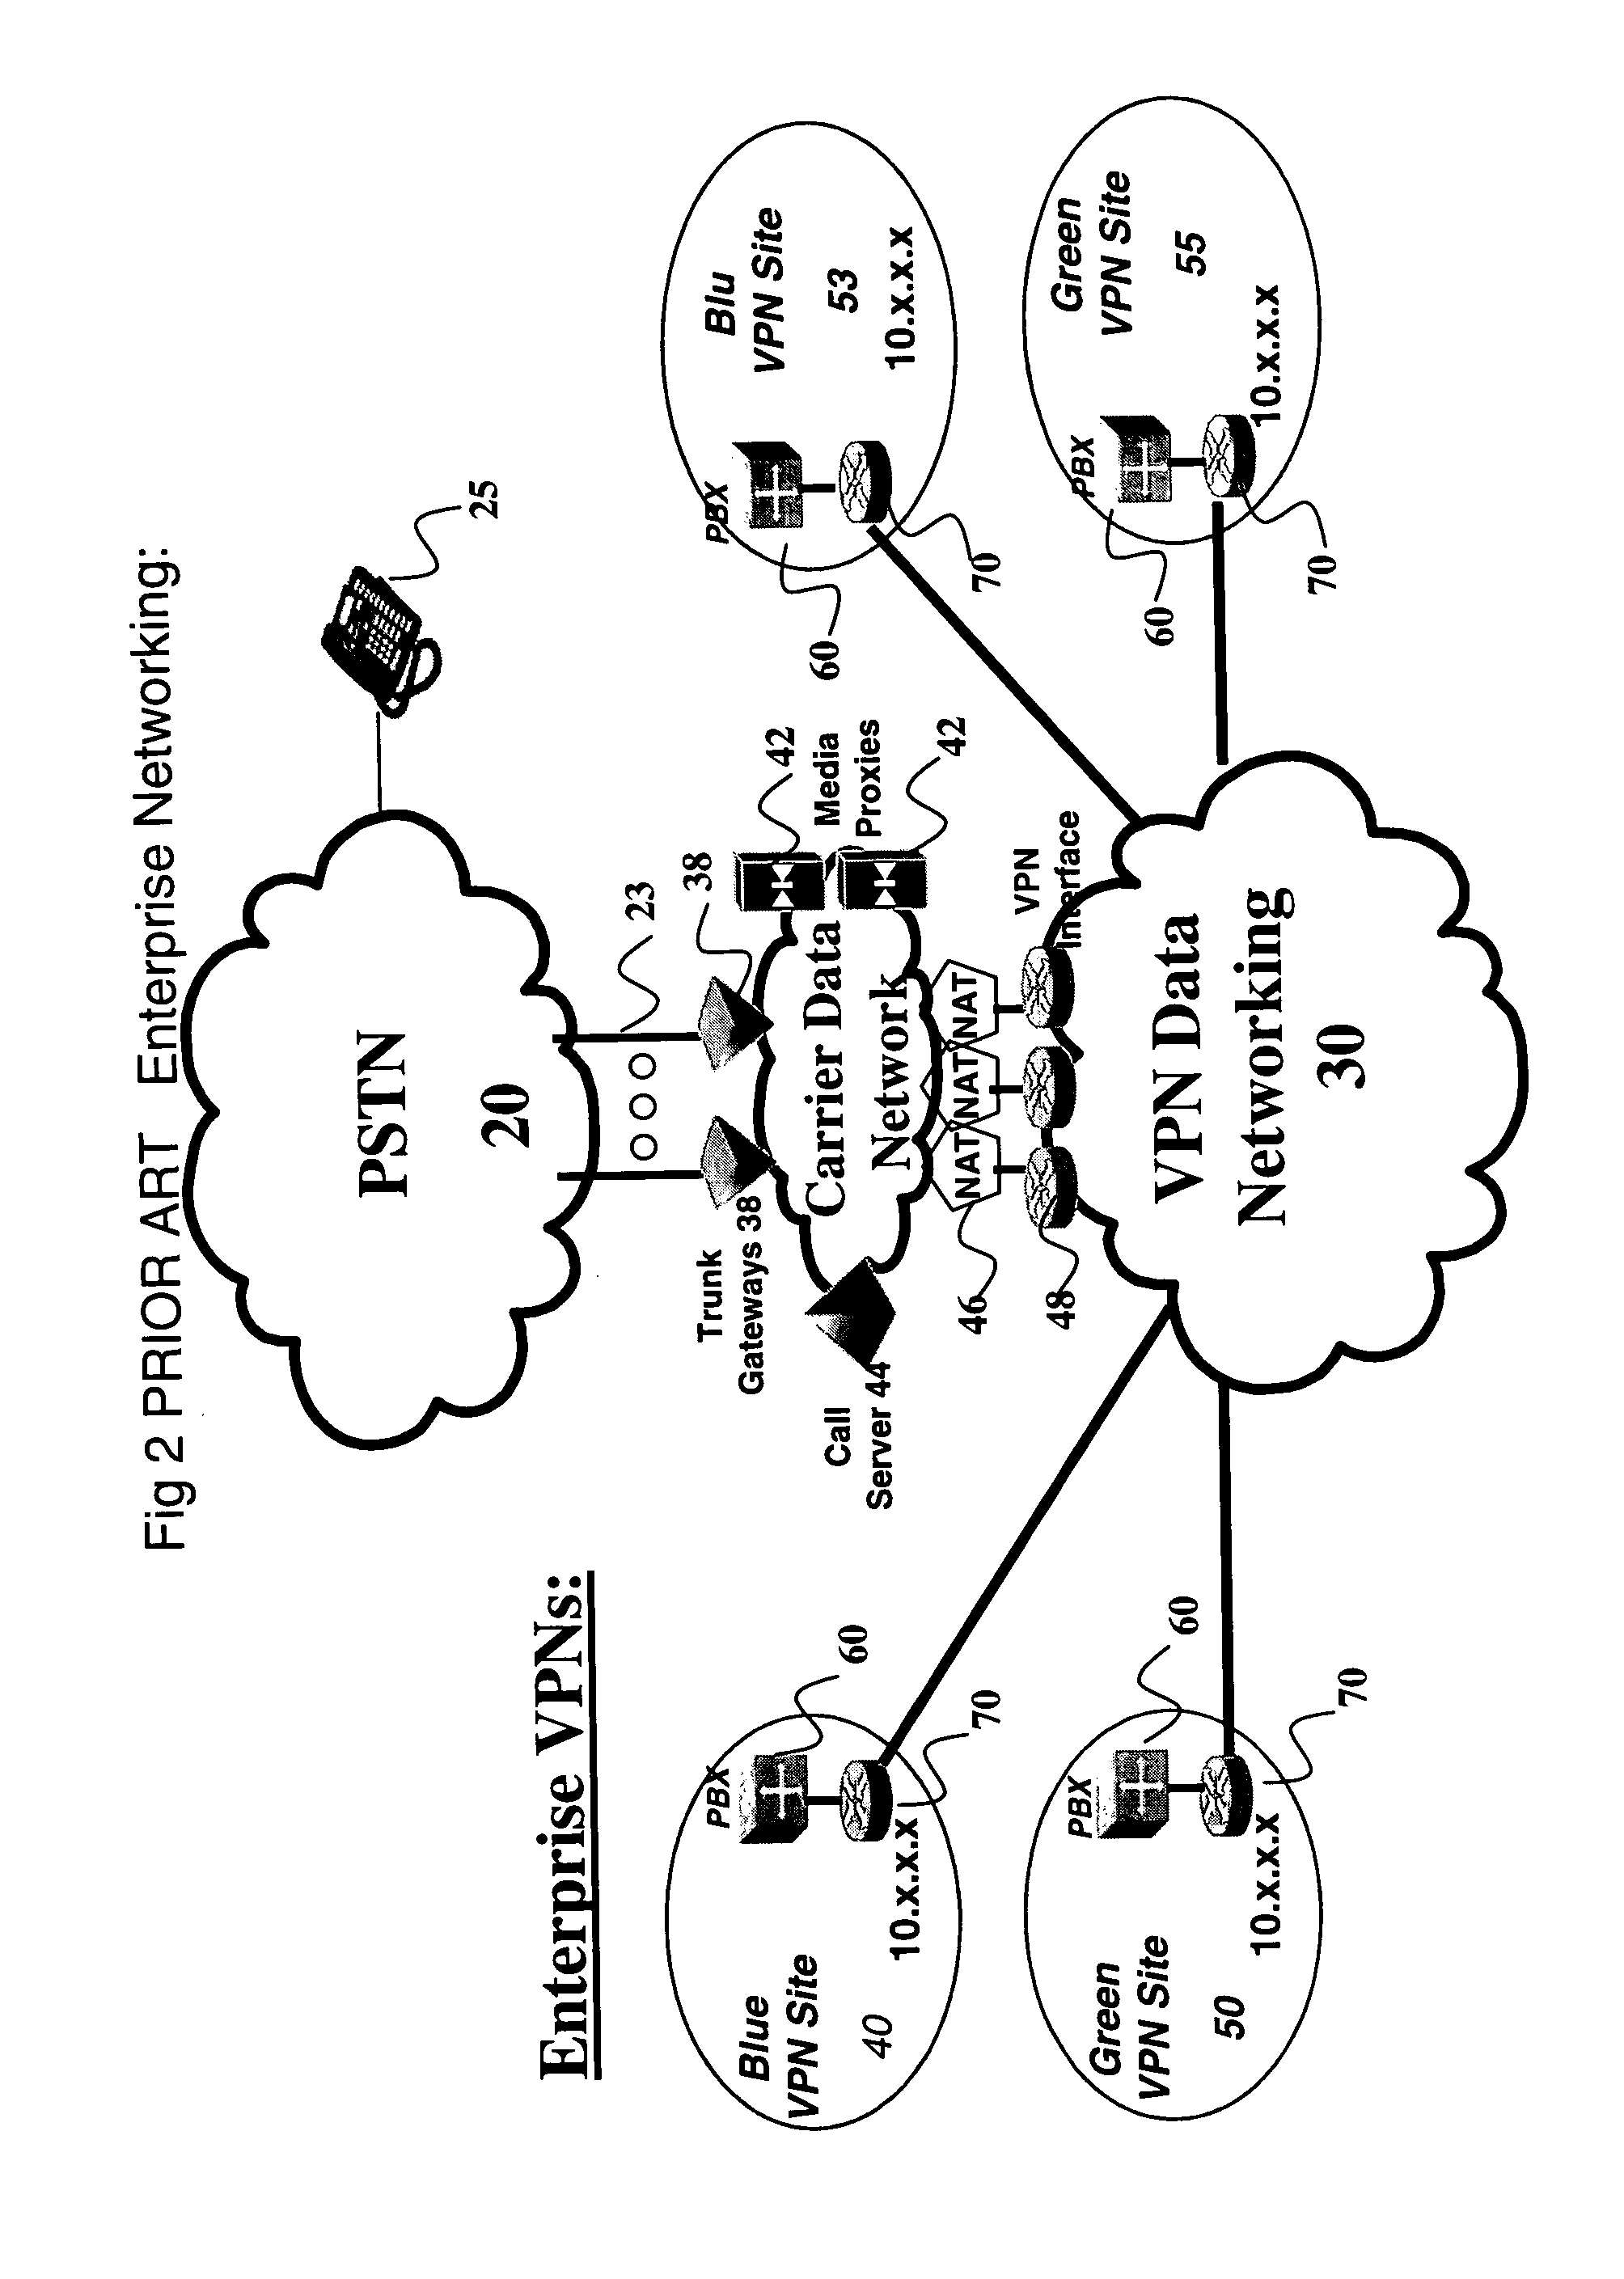 Convertor shared by multiple virtual private networks